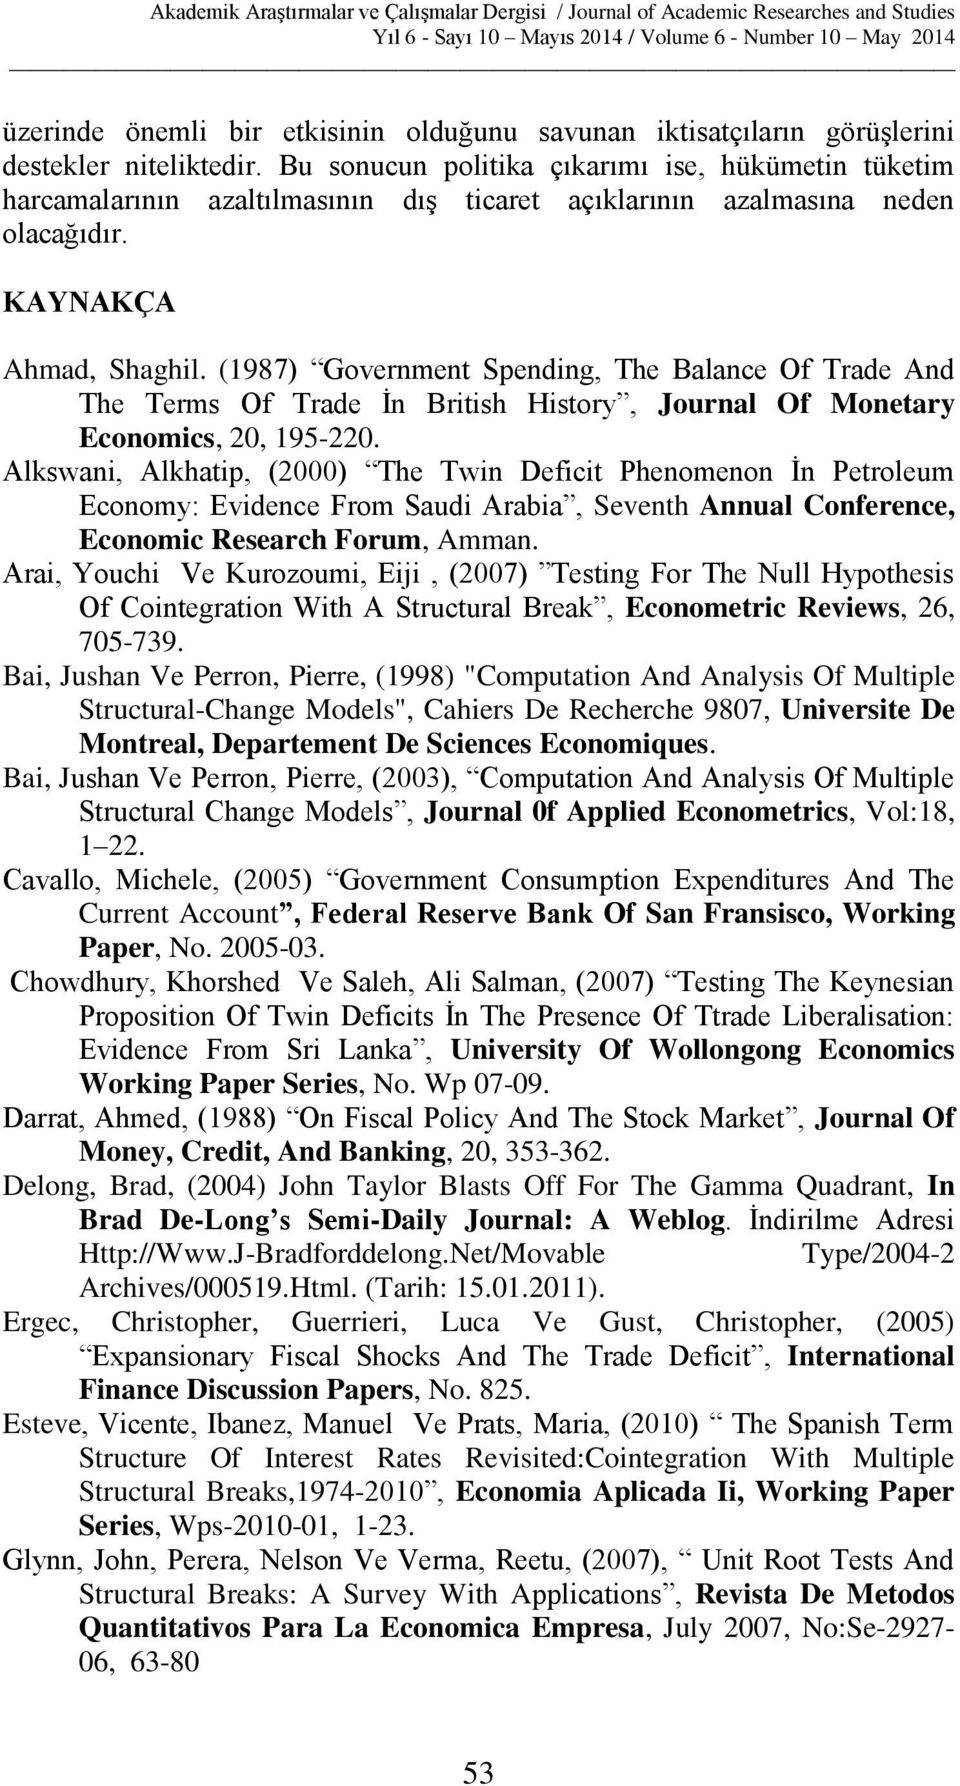 (987) Governmen Spending, he Balance Of rade And he erms Of rade İn Briish Hisory, Journal Of Moneary Economics, 0, 95-0.